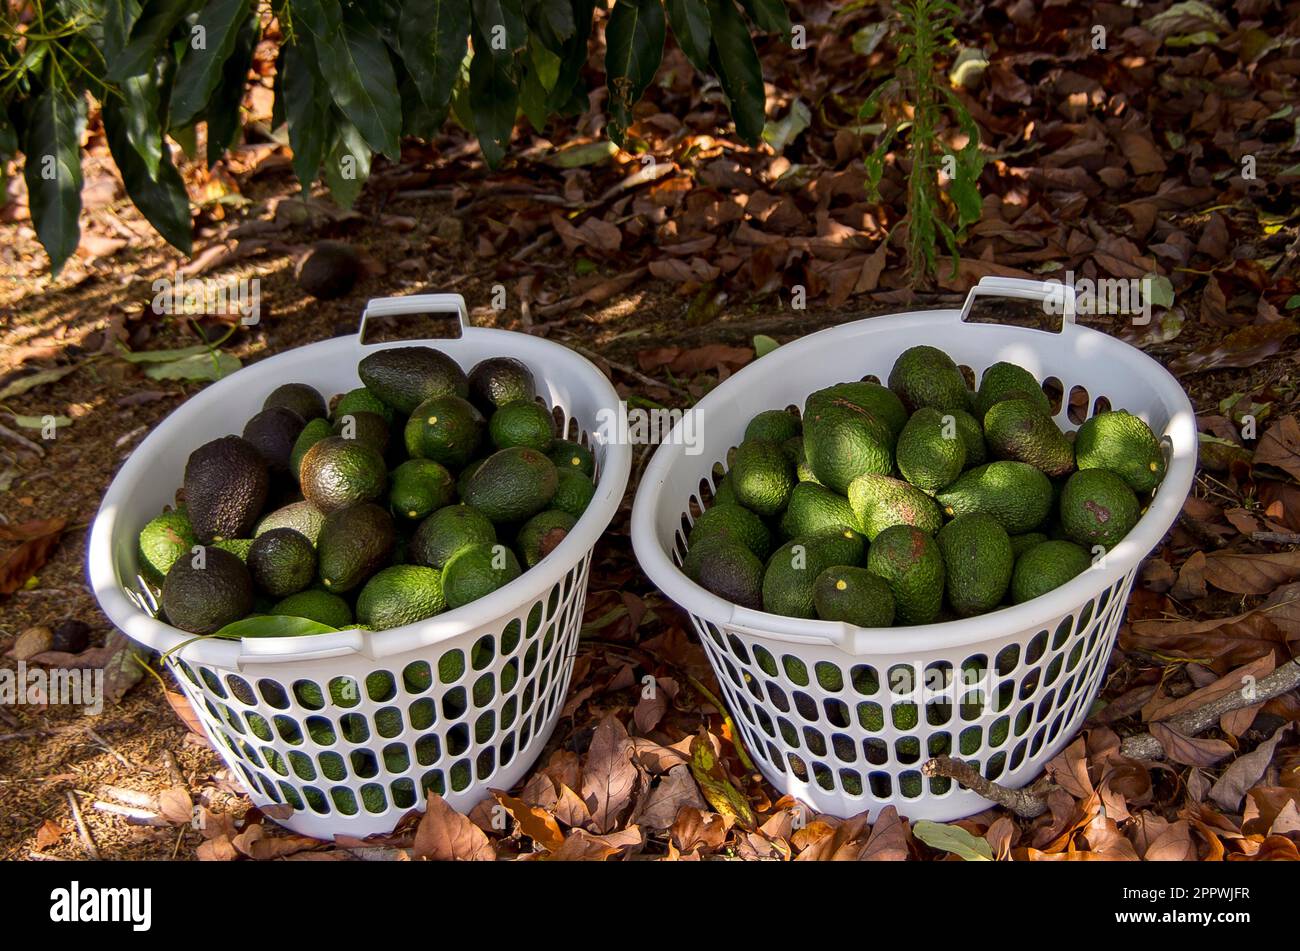 Two white plastic baskets full of freshly picked Hass avocados, persea americana. Harvest in orchard on Tamborine Mountain, Queensland, Australia. Stock Photo